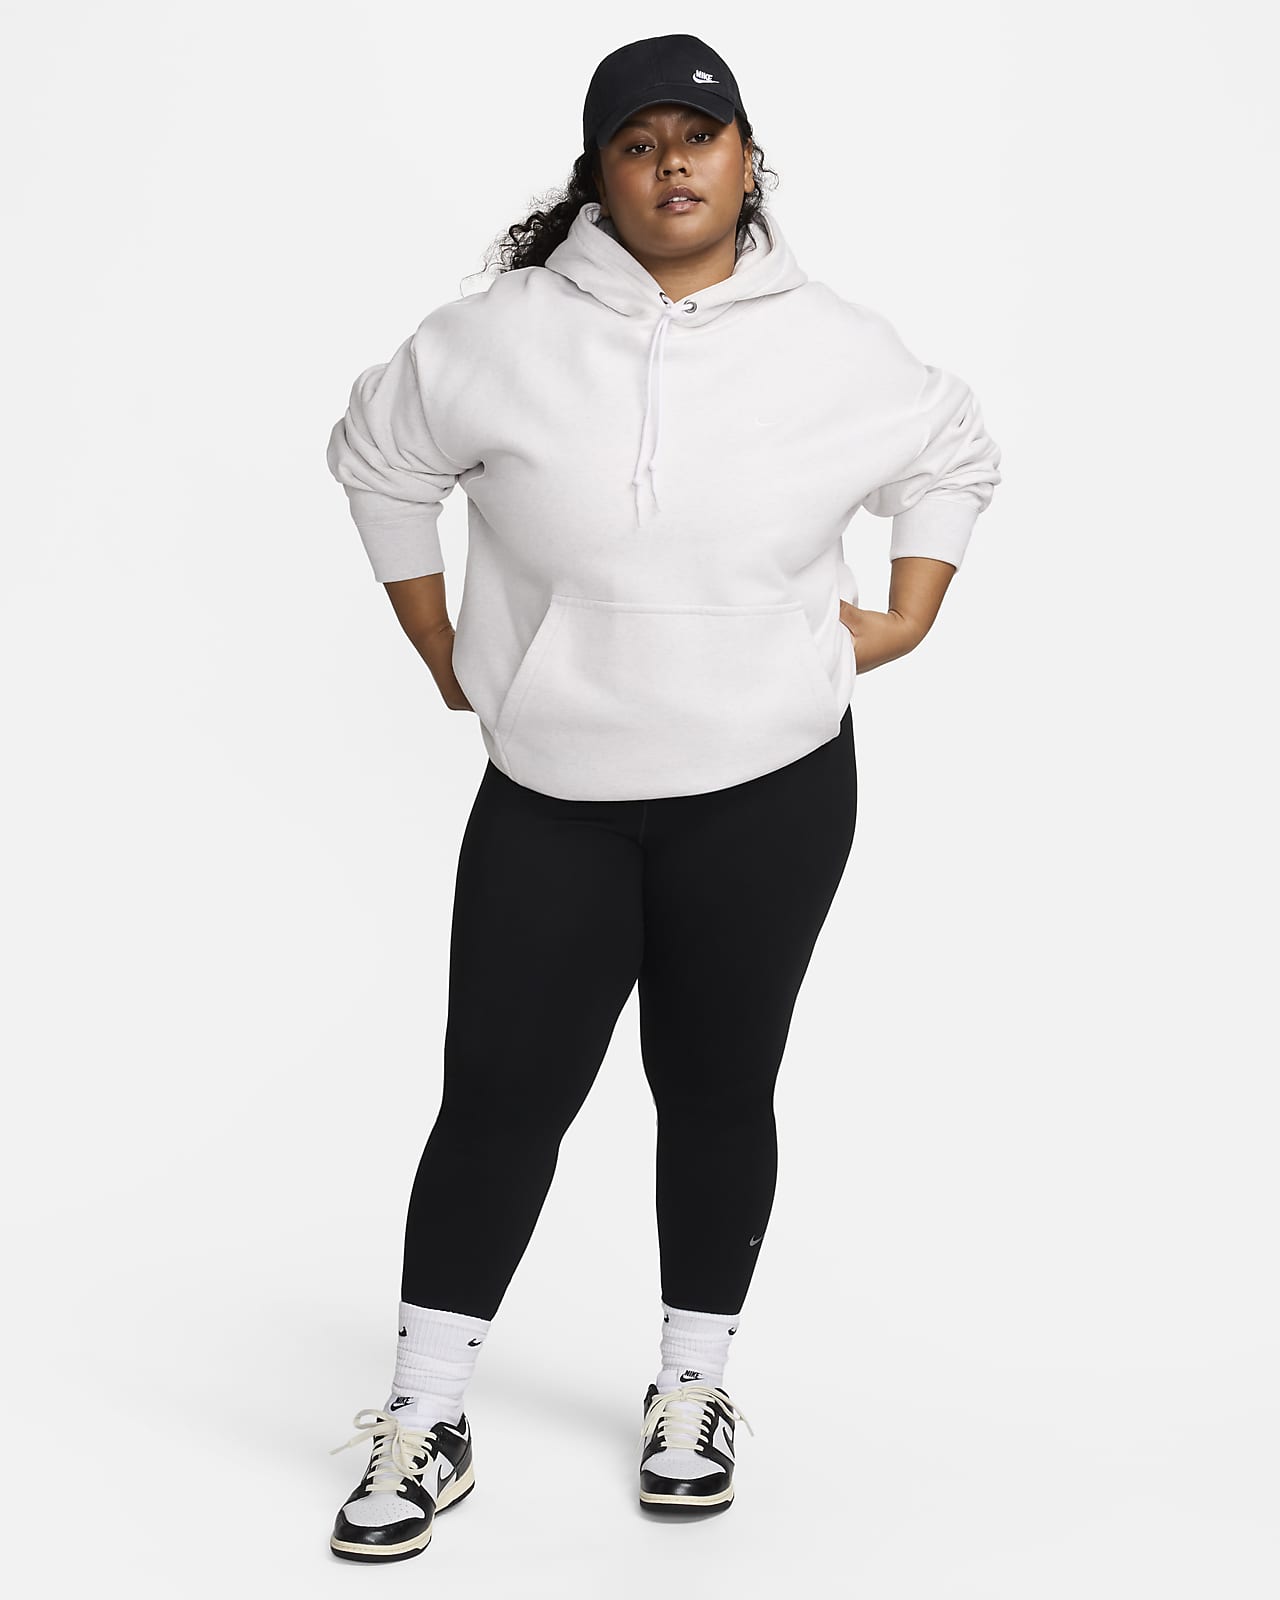 Nike Factory Store Plus Size 1/2 Length Tights & Leggings.